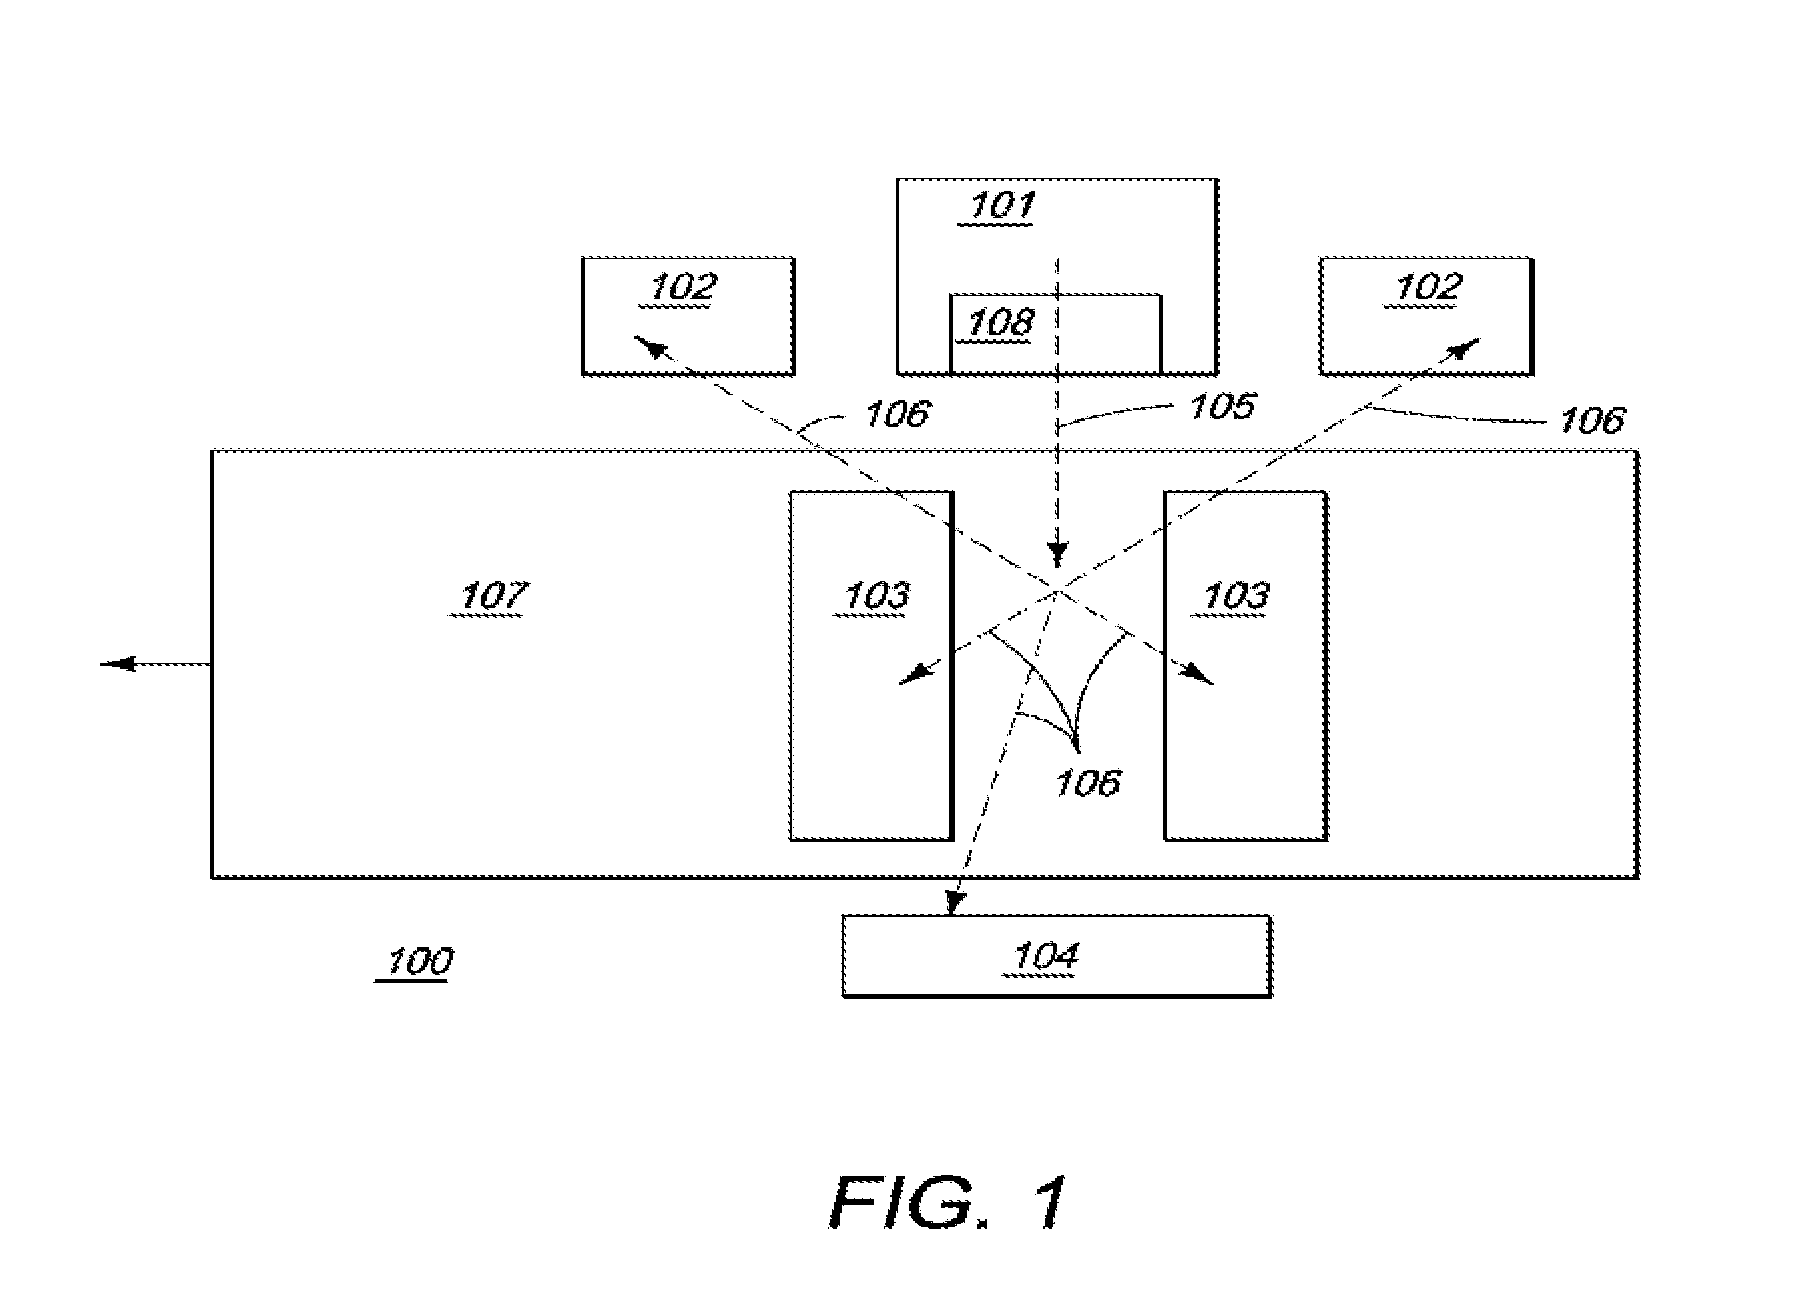 Integrated Primary and Special Nuclear Material Alarm Resolution